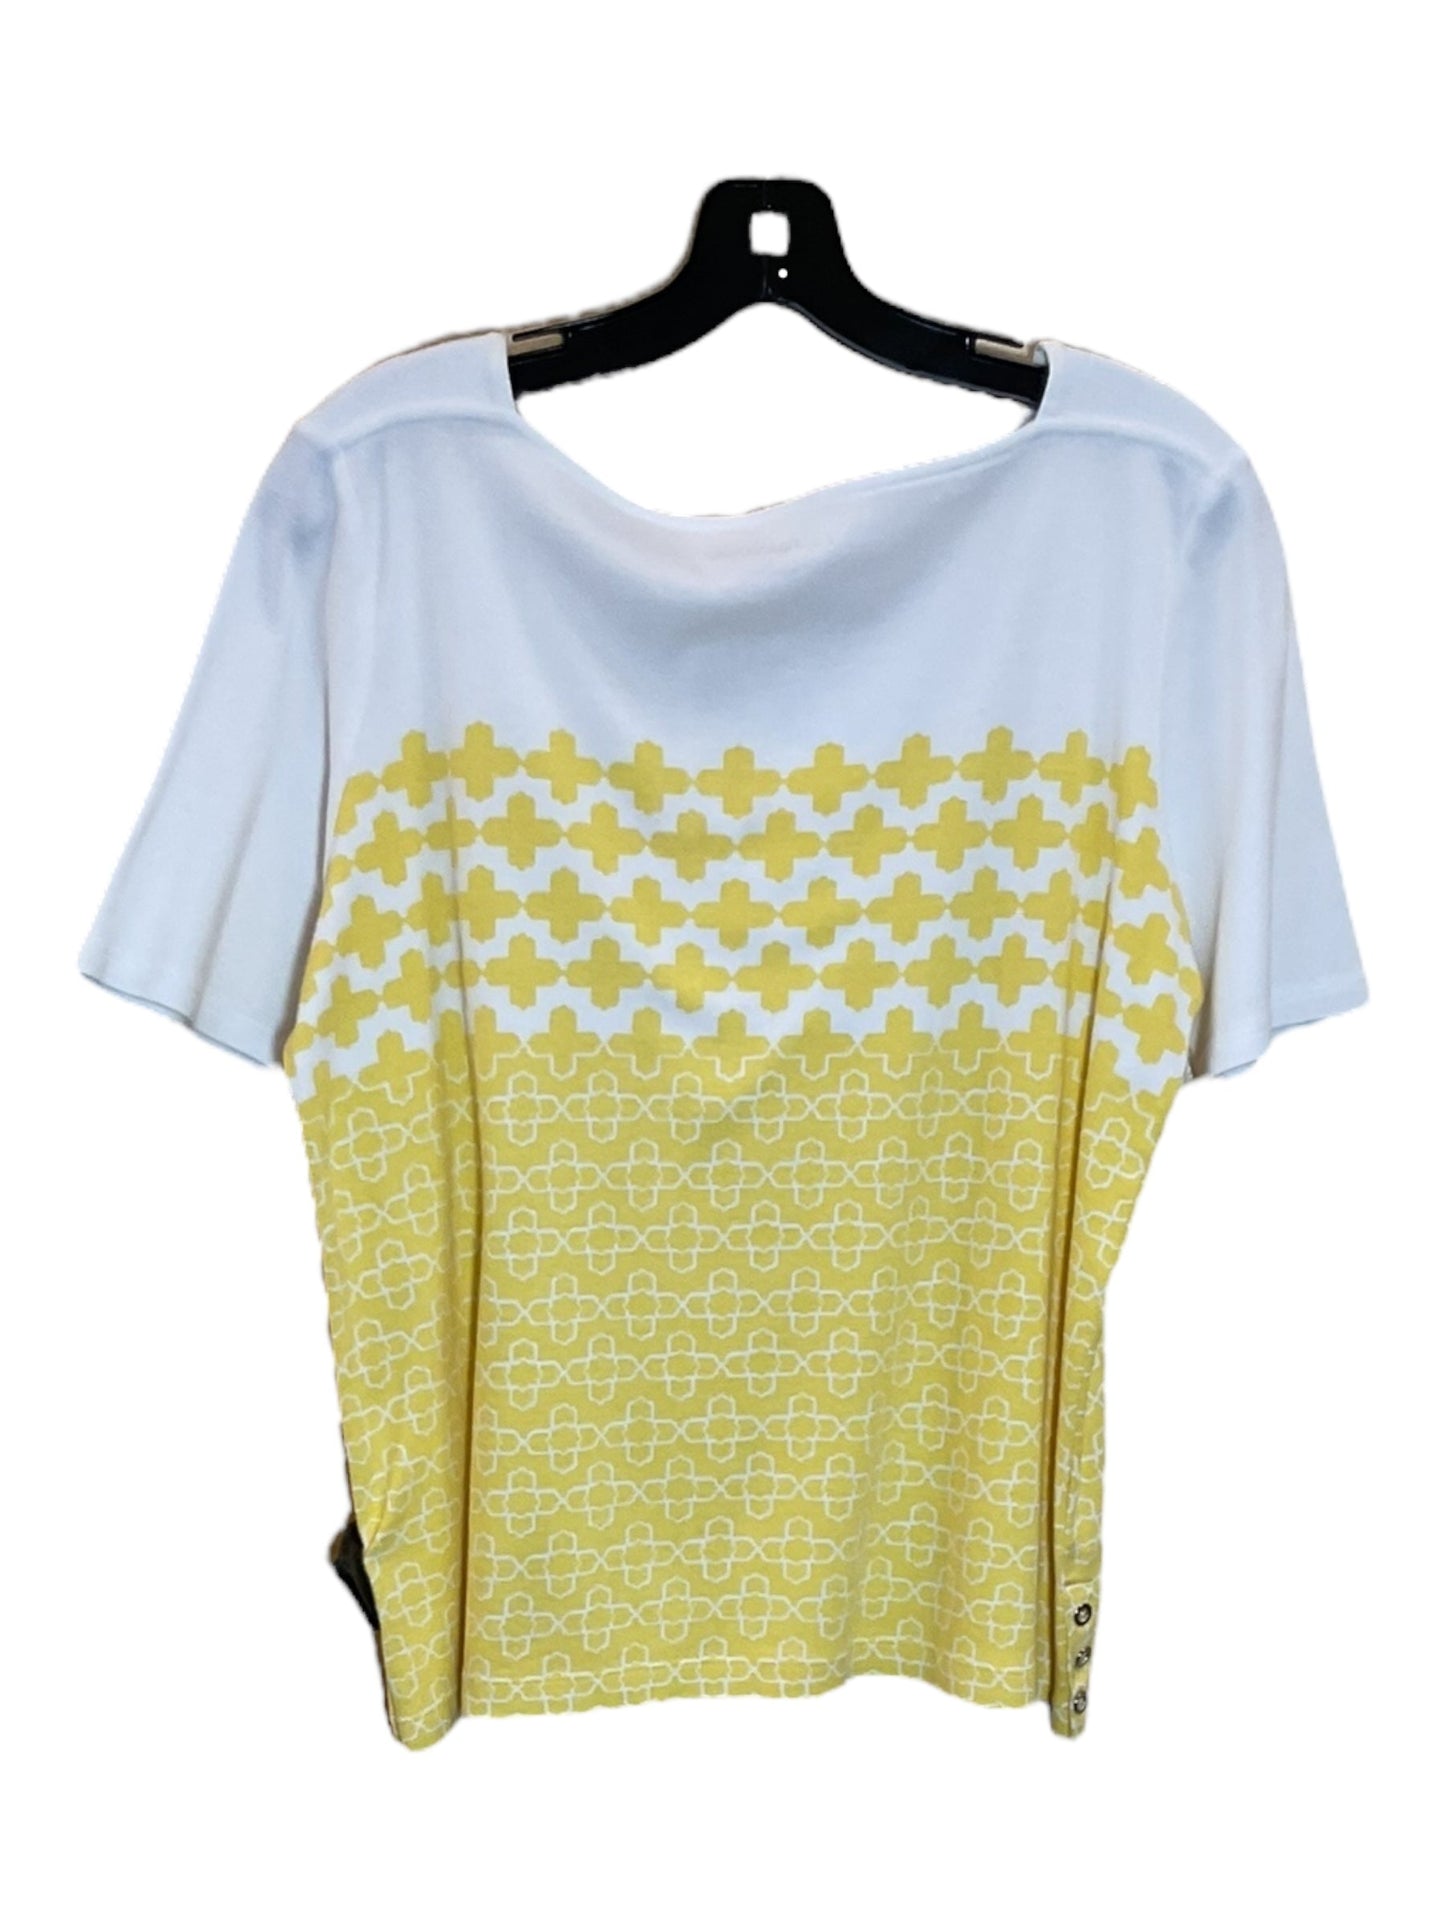 White & Yellow Top Short Sleeve Croft And Barrow, Size L